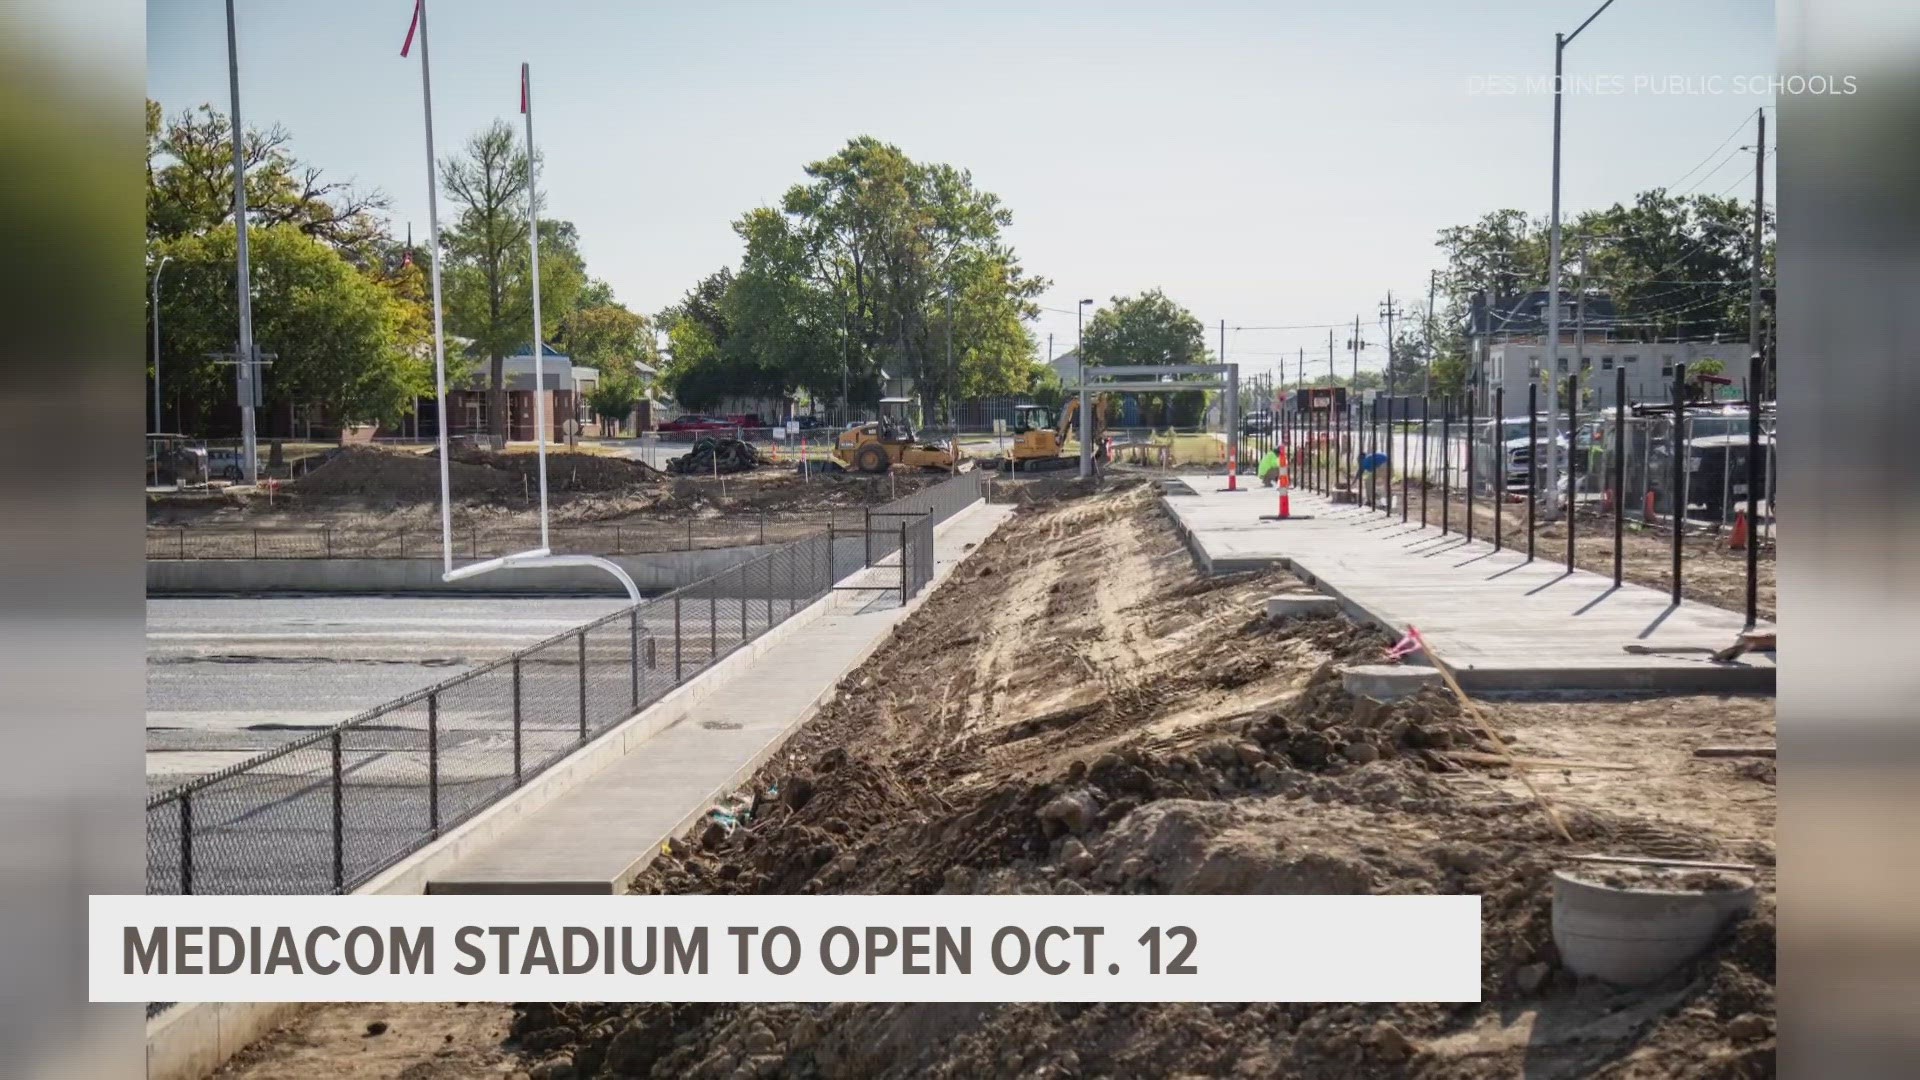 The 4,000-seat stadium will host sporting events for DMPS middle and high school teams, and provide a home venue for Drake men's and women's soccer games.